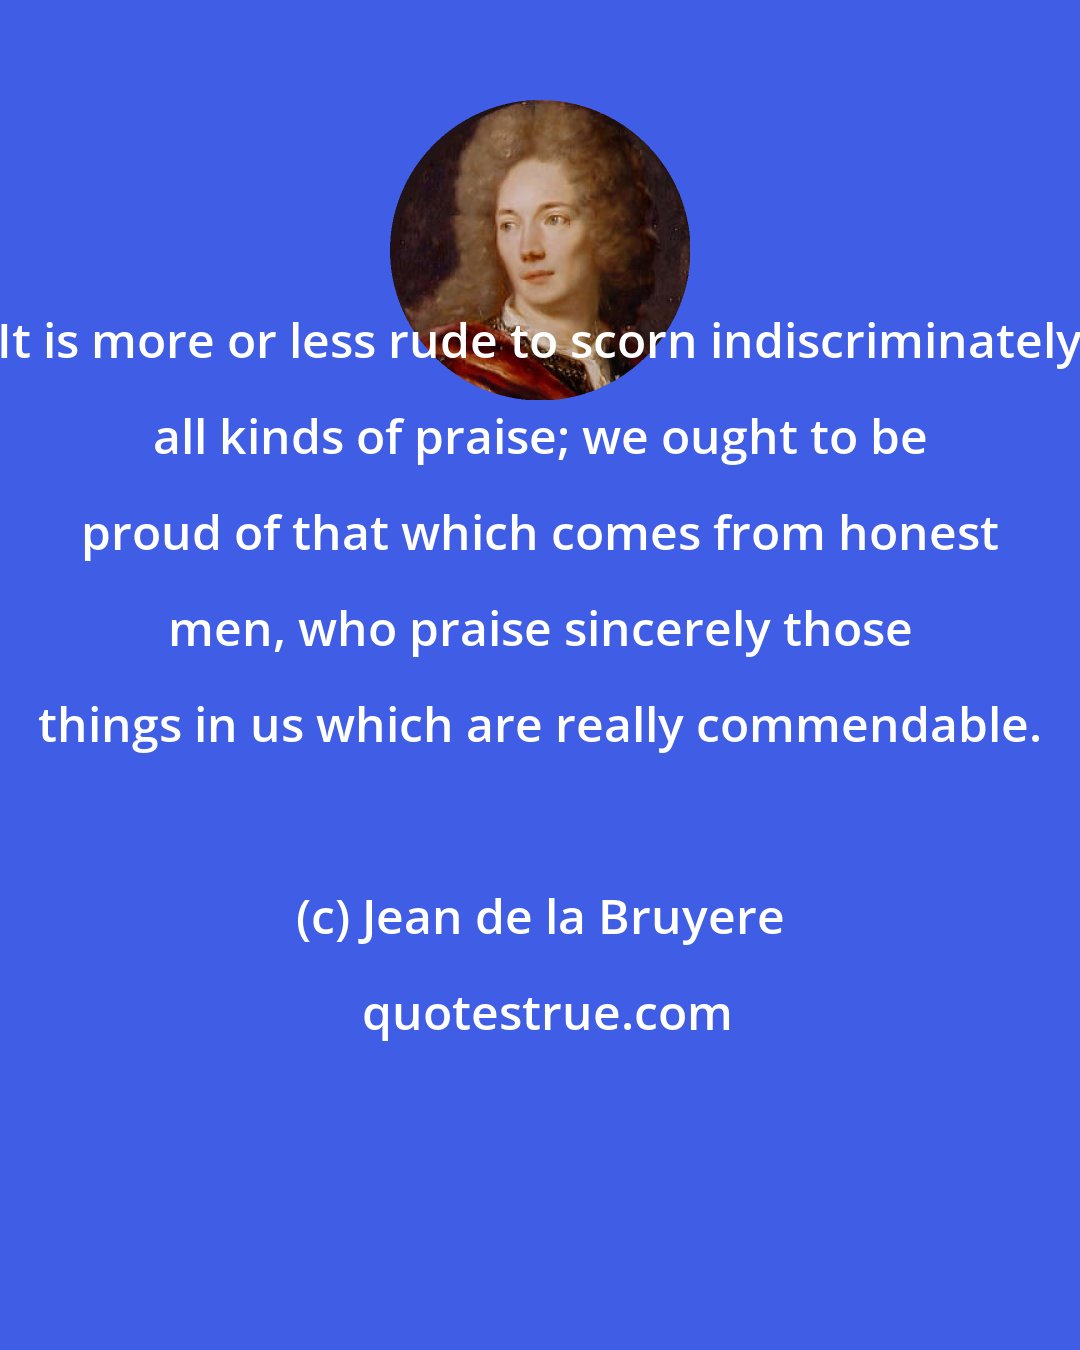 Jean de la Bruyere: It is more or less rude to scorn indiscriminately all kinds of praise; we ought to be proud of that which comes from honest men, who praise sincerely those things in us which are really commendable.